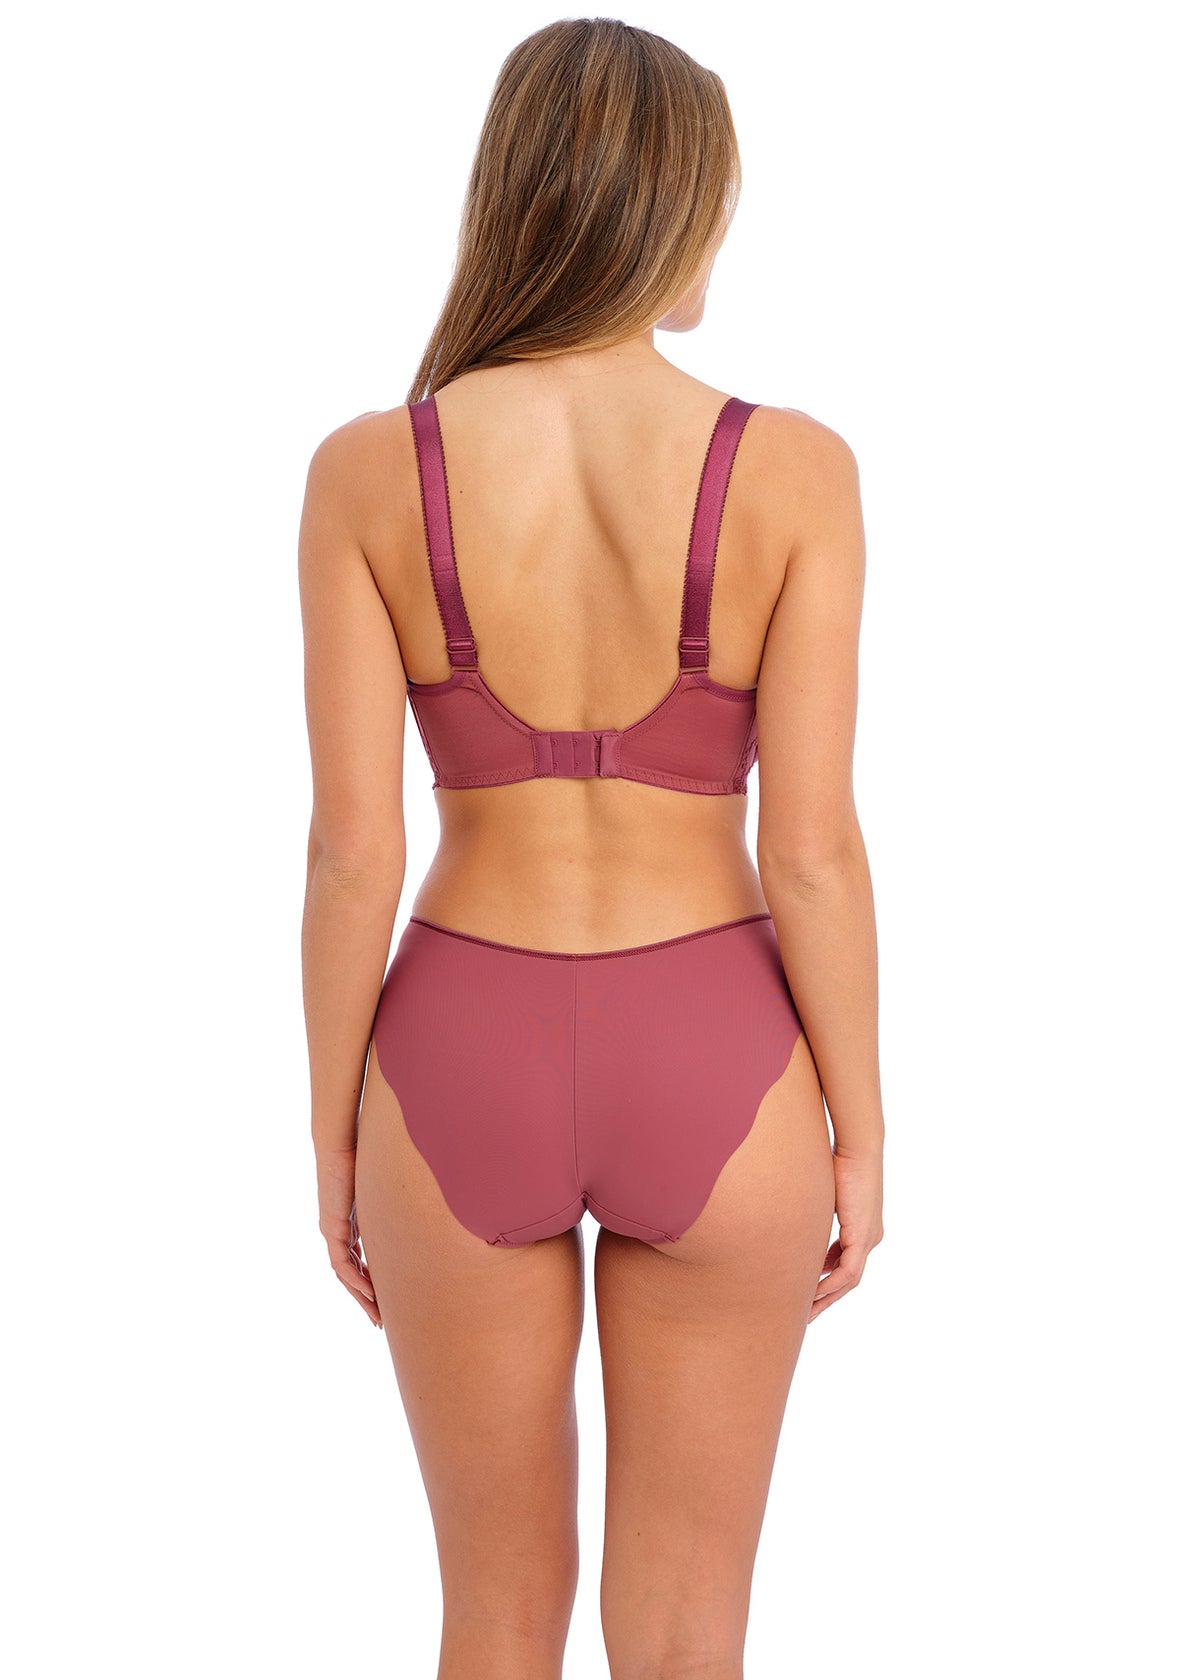 FANTASIE ANA FULL CUP SIDE SUPPORT-ROSEWOOD